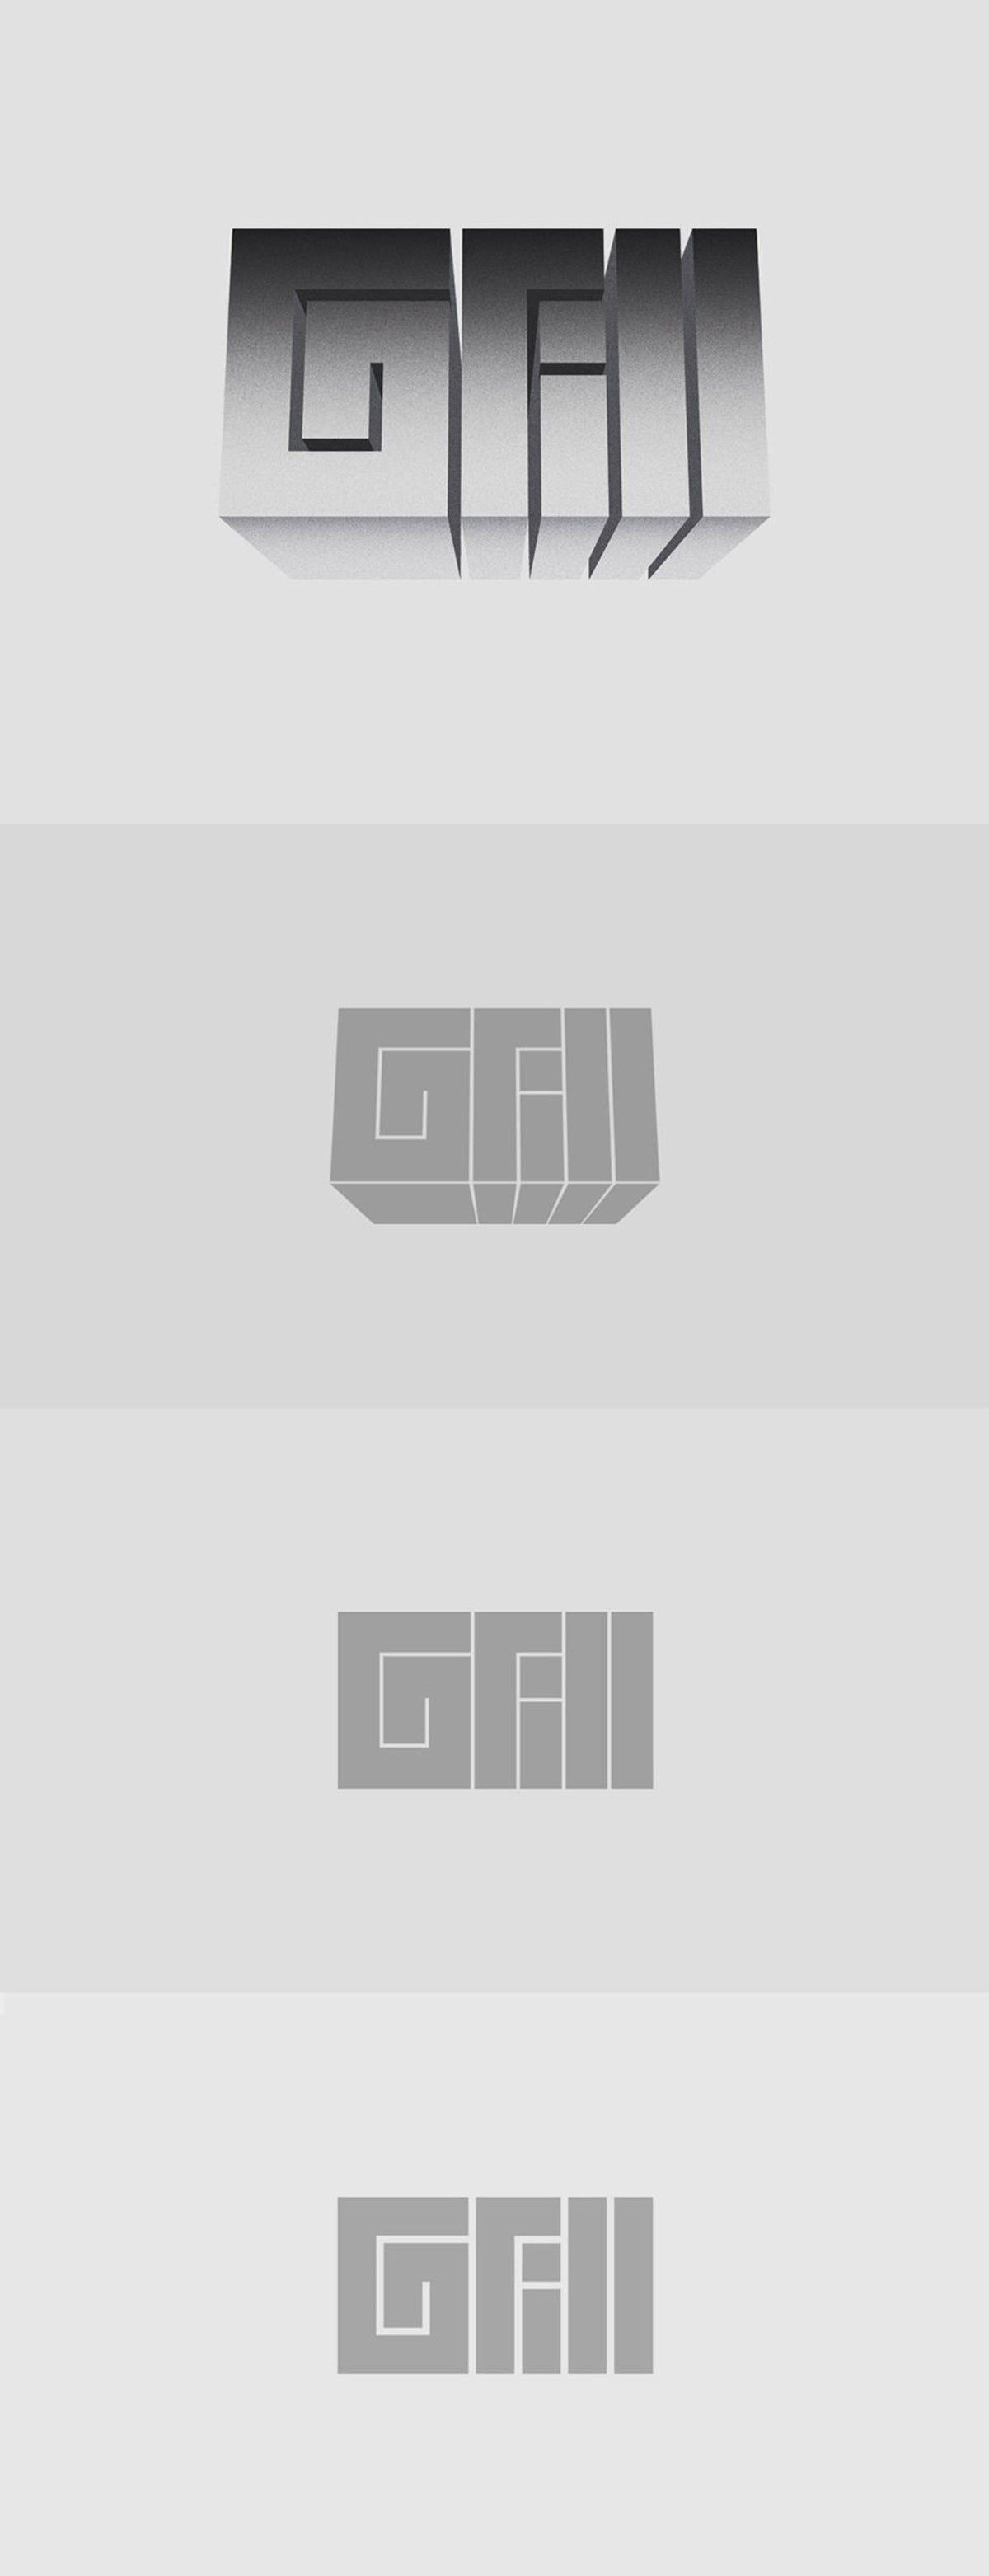 Fast Company Grill. Logo variations. Brand identity design by Superfried.